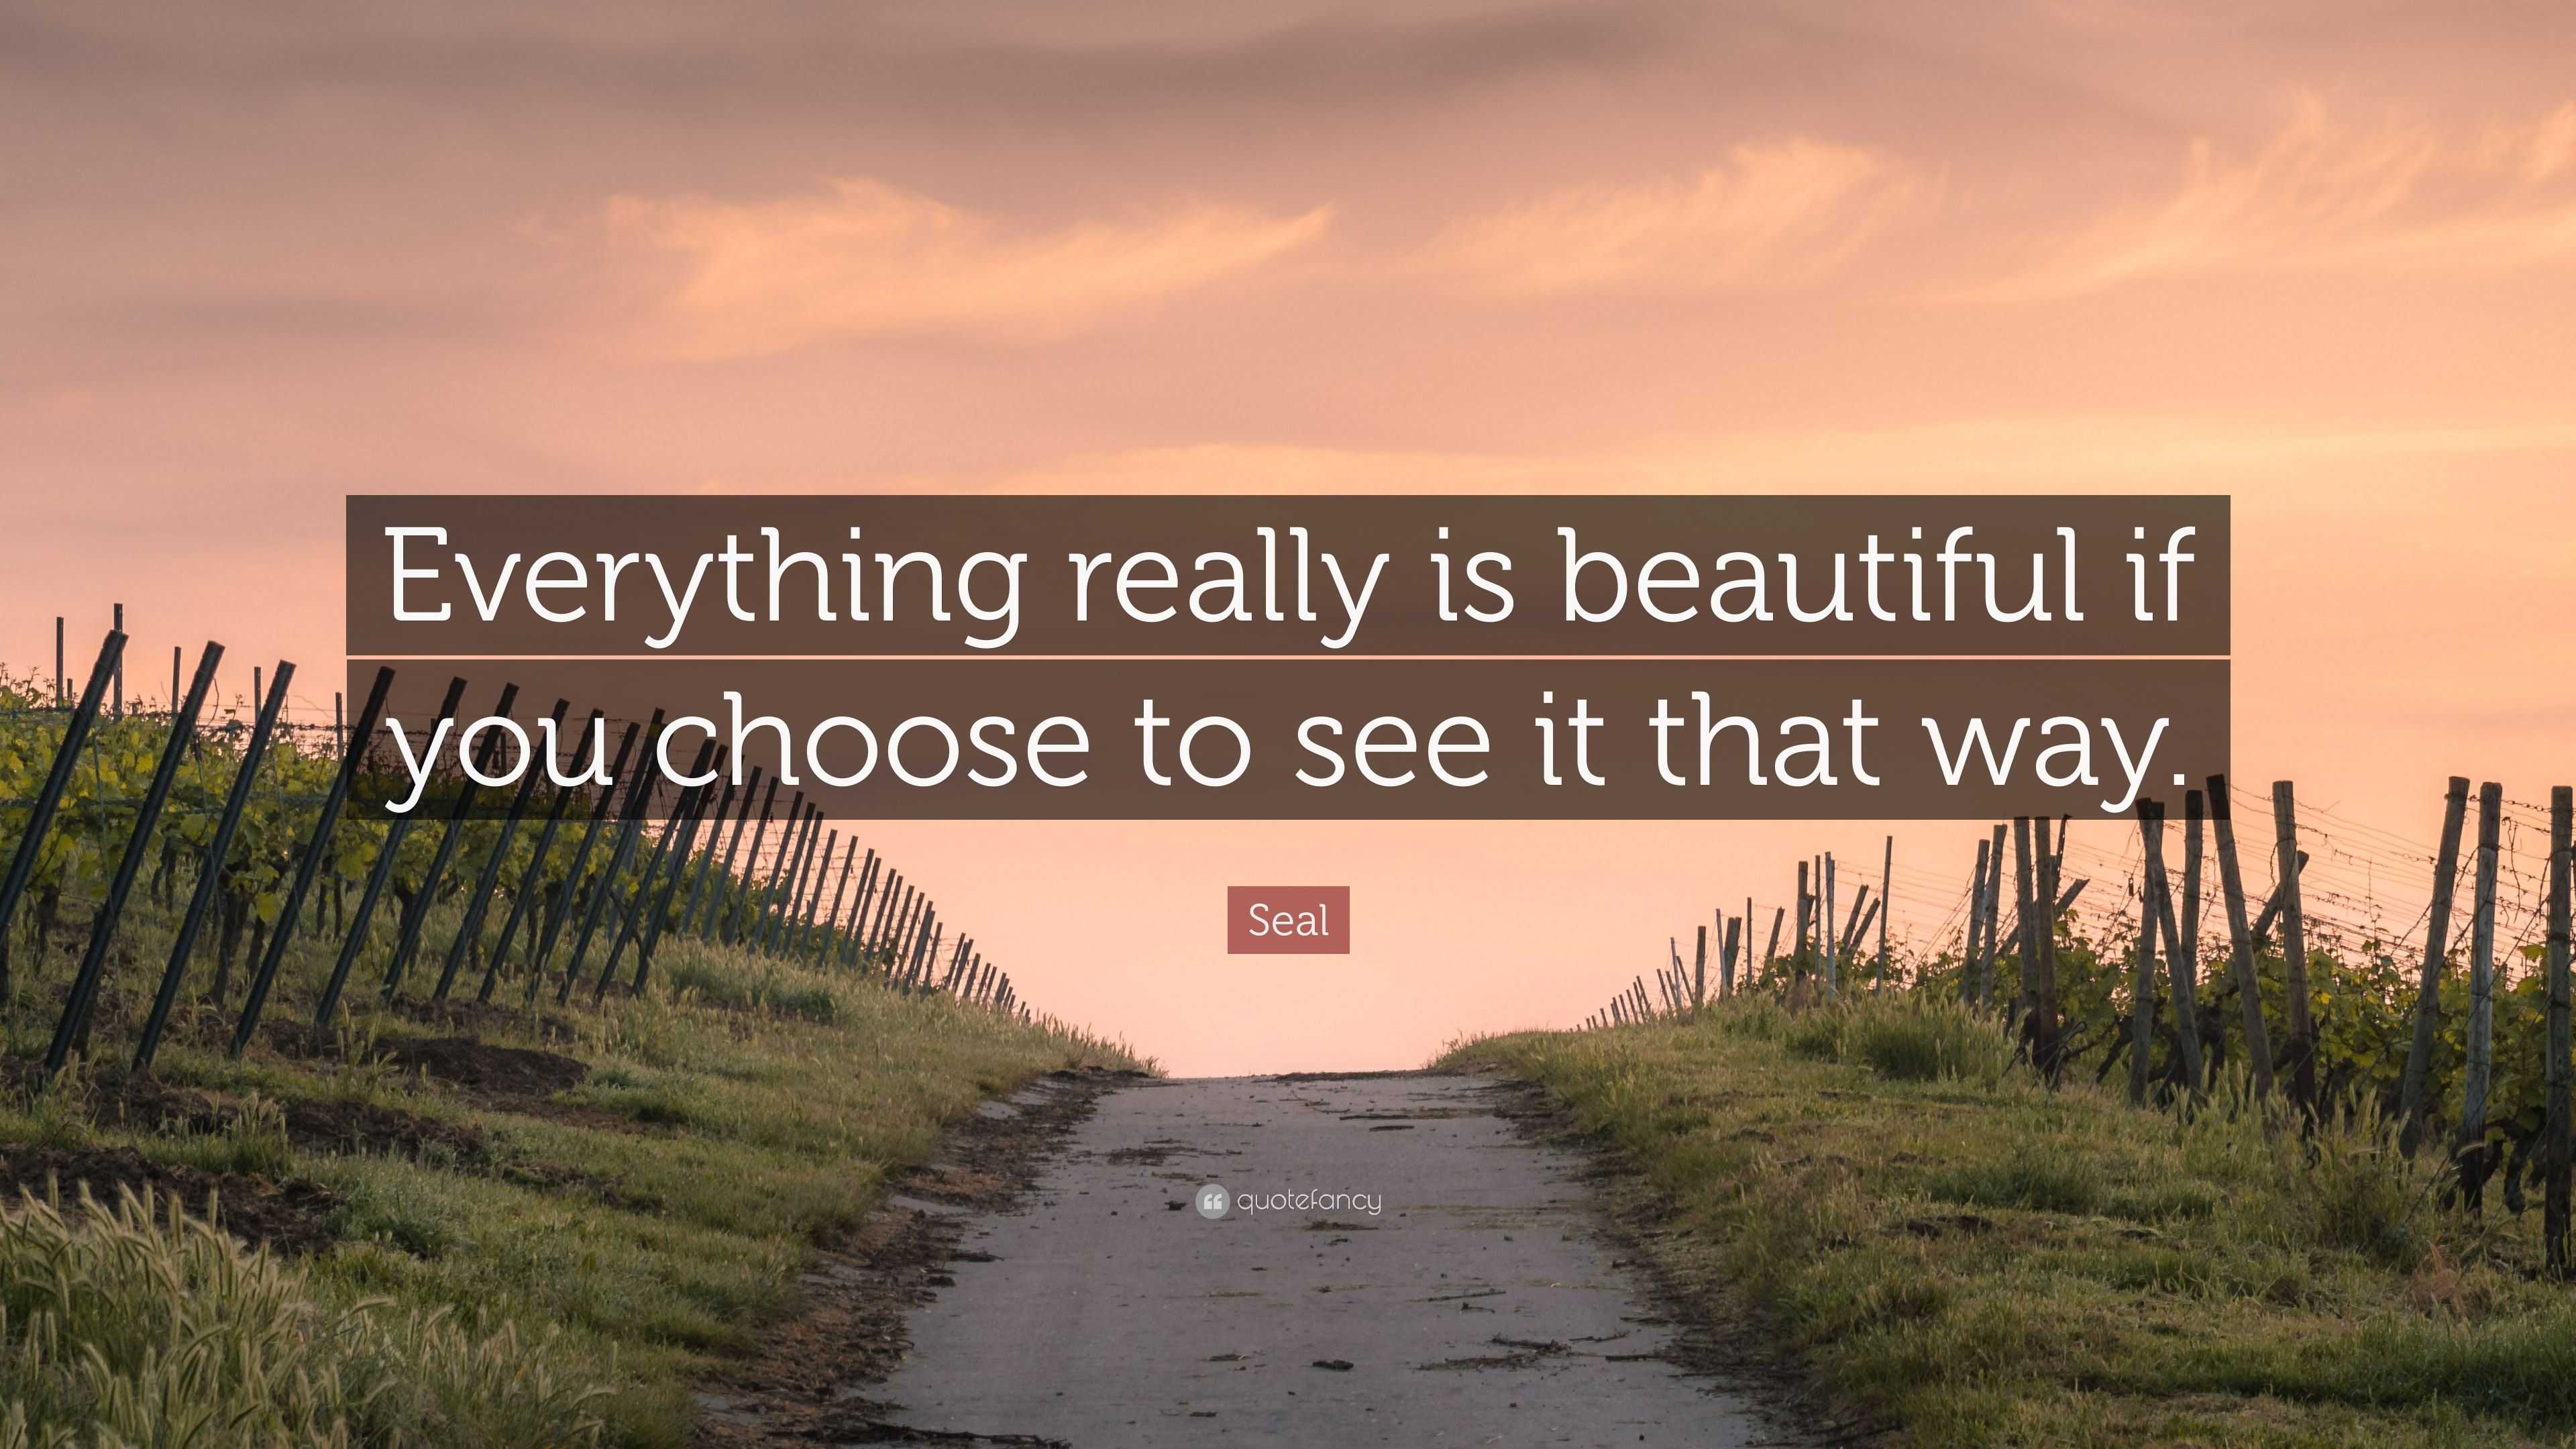 Seal Quote: “Everything really is beautiful if you choose to see it